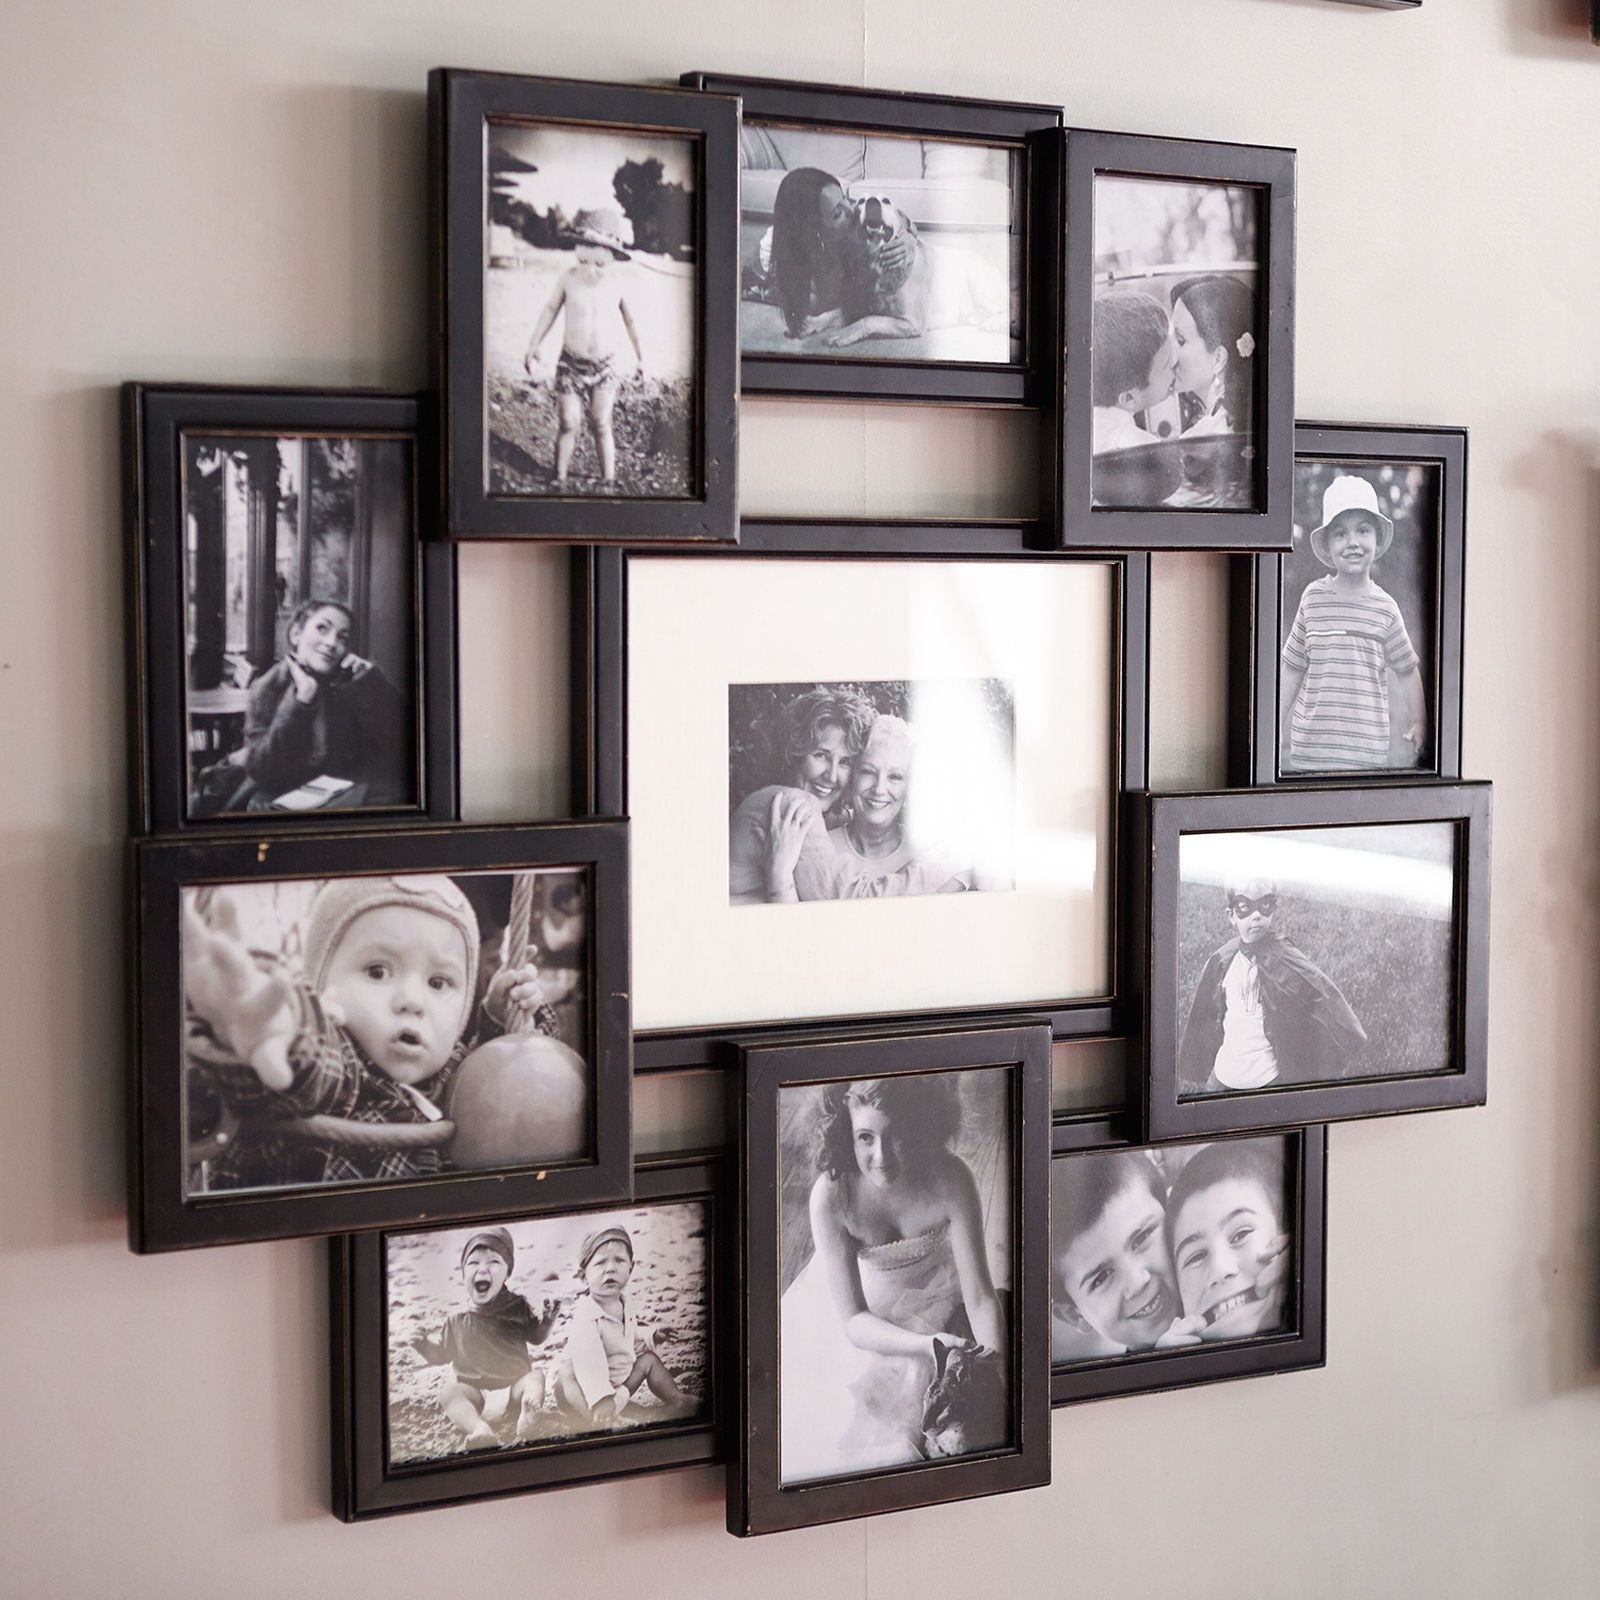 With this awesome collage frame you wont have to choose